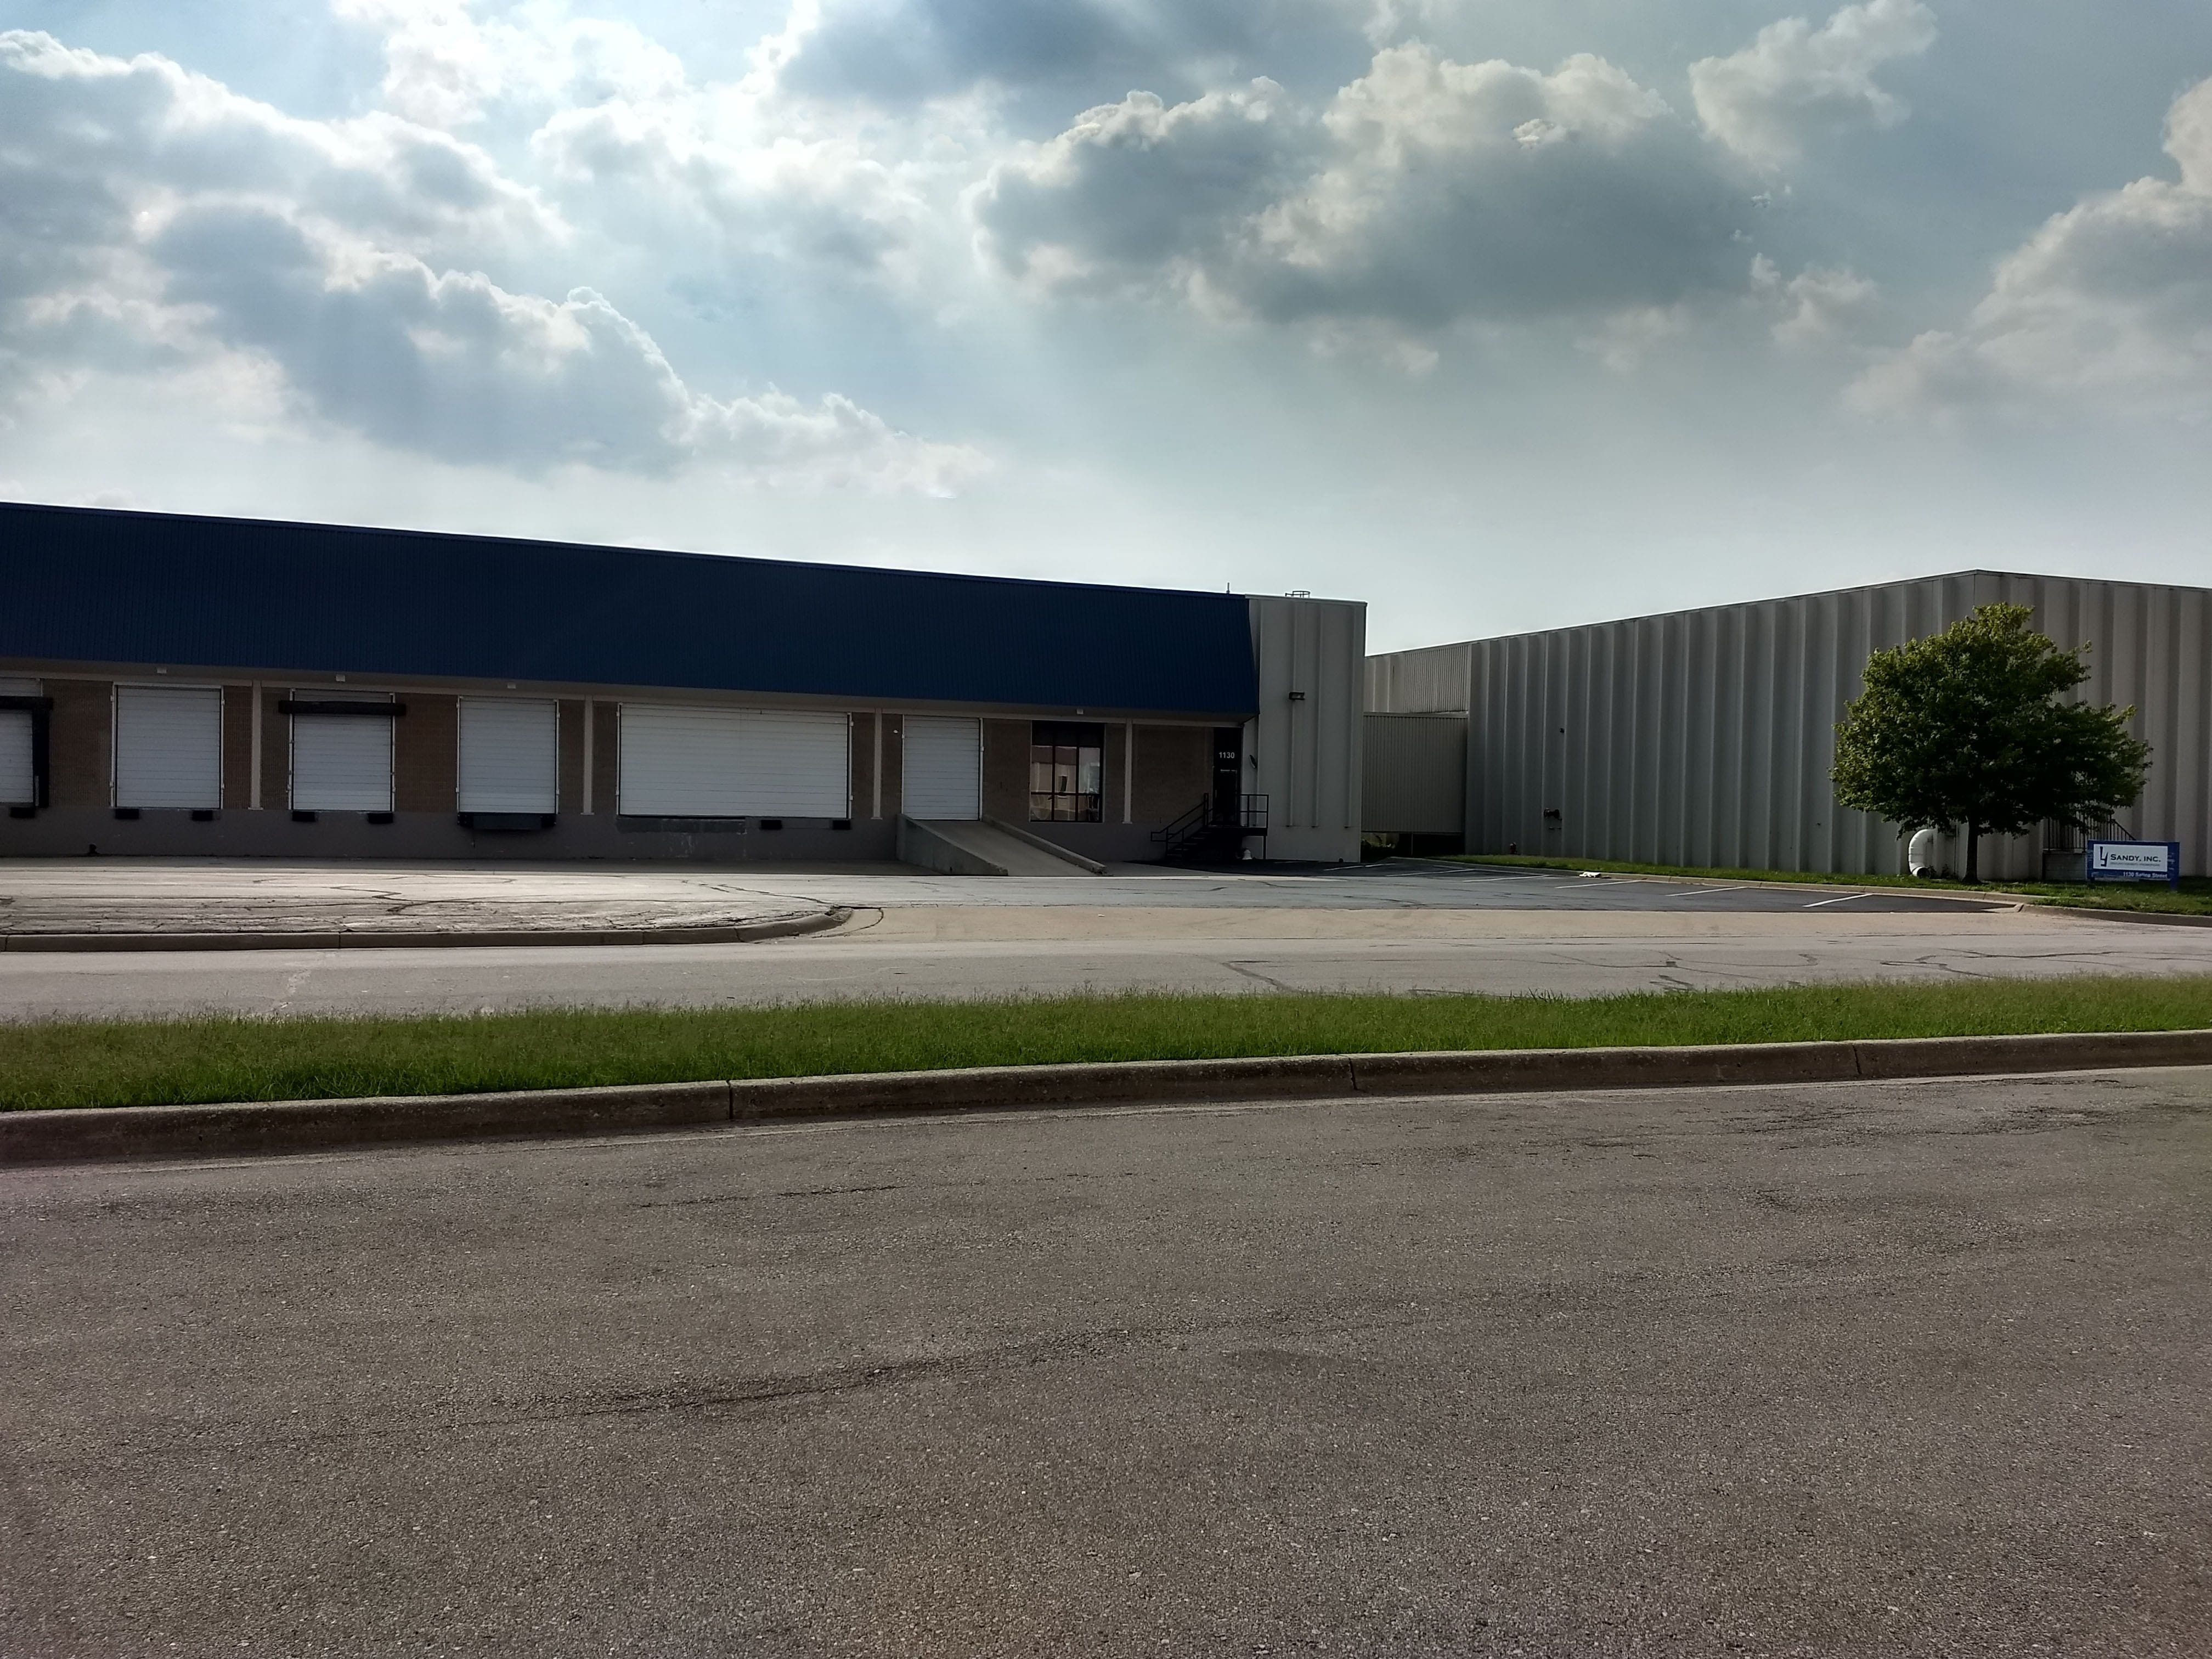 The company is located in a 33,000 square foot facility in North Kansas City, Missouri.